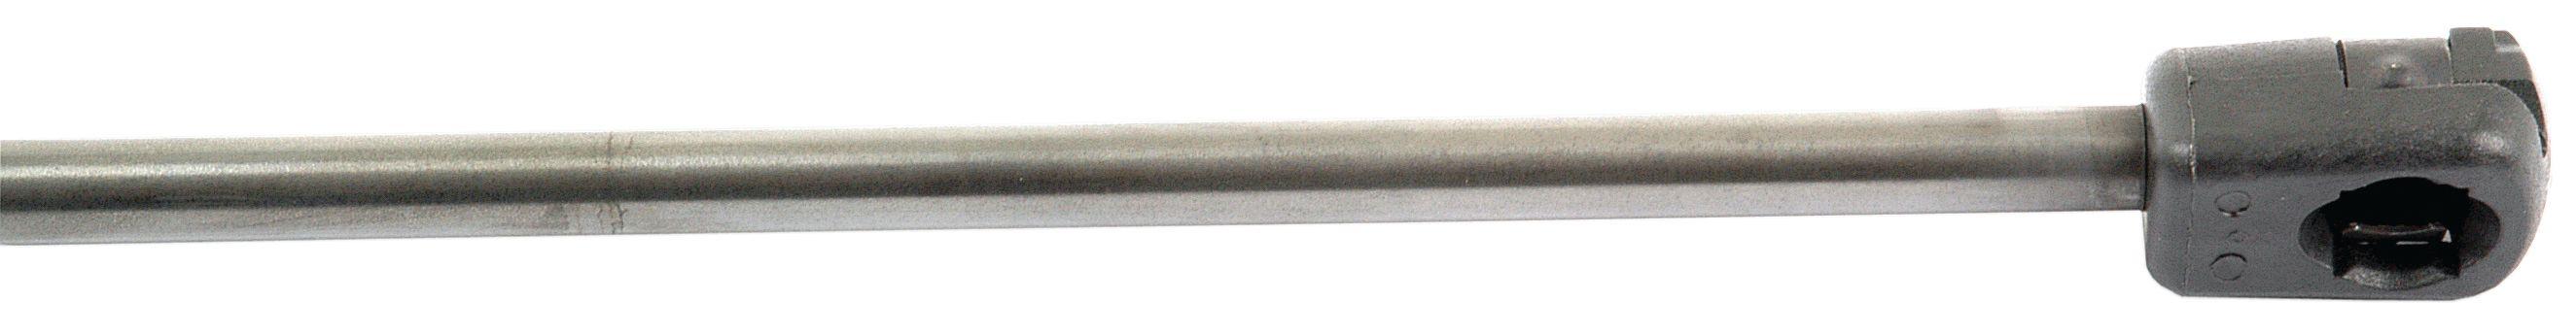 FORD NEW HOLLAND GAS STRUT 54535